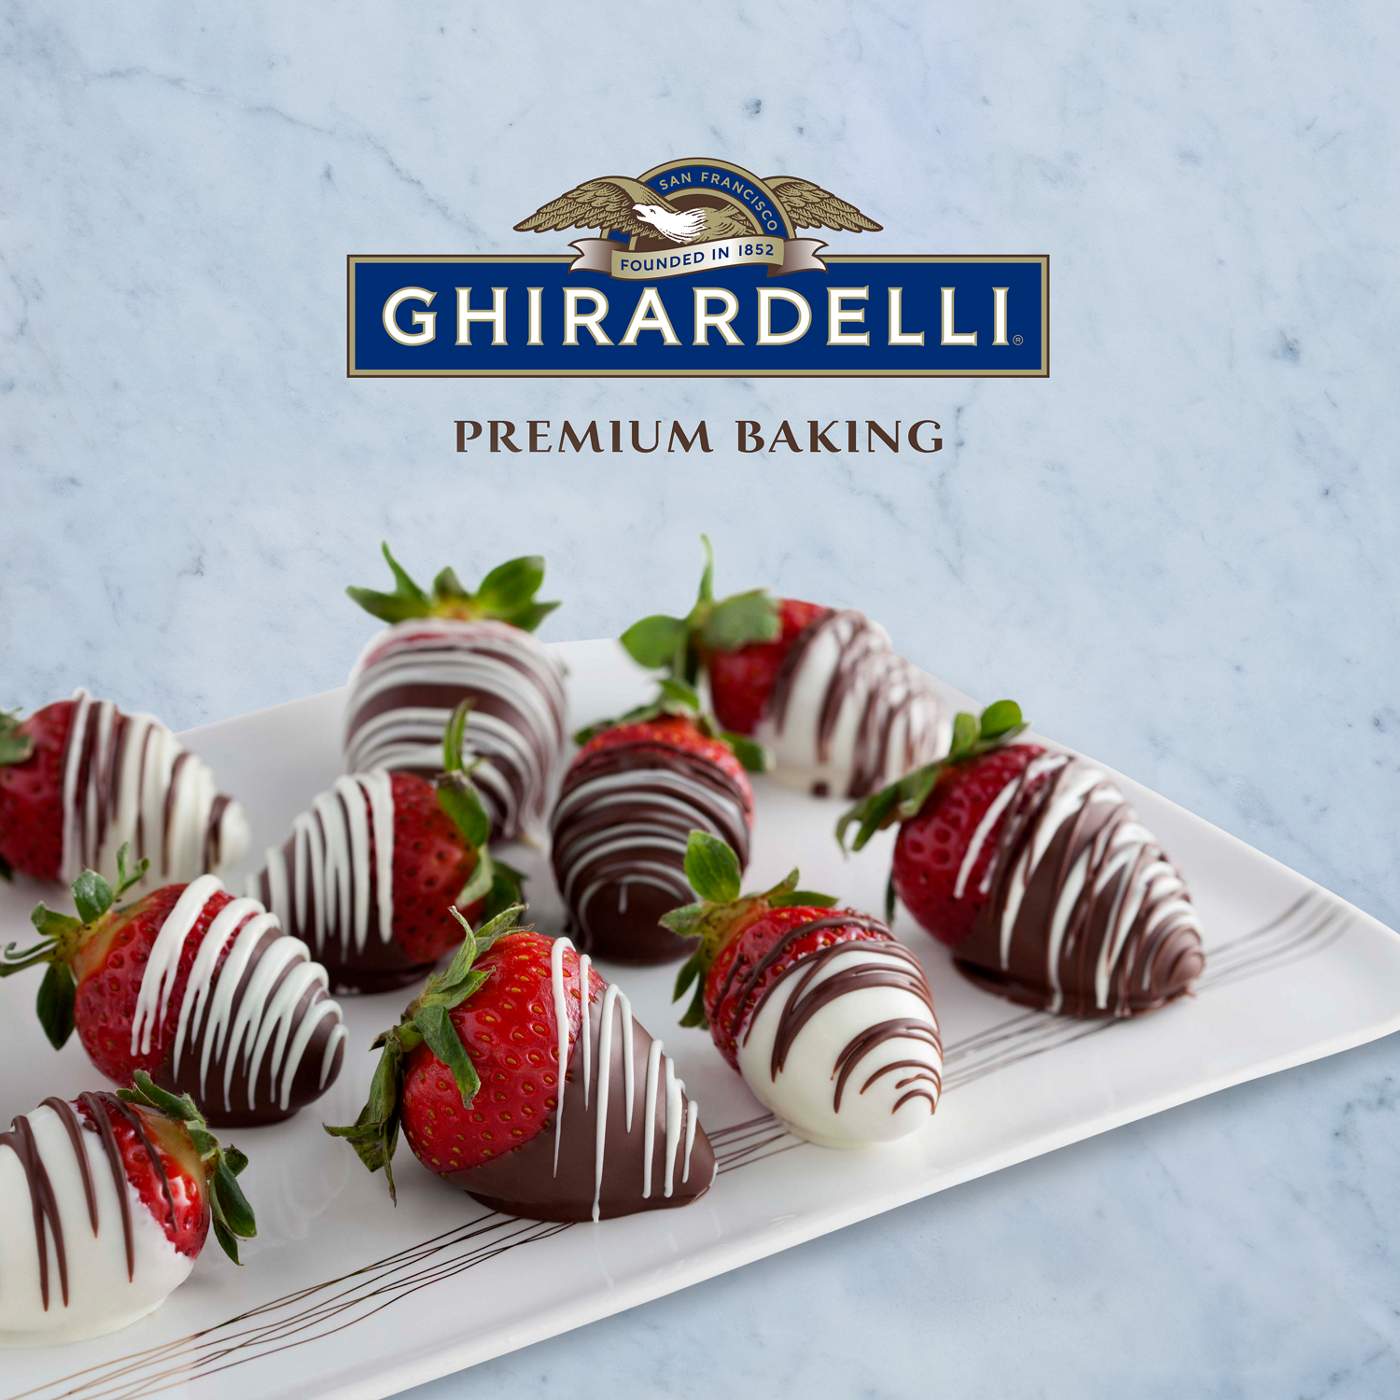 Ghirardelli Dark Chocolate Flavored Melting Wafers; image 5 of 7